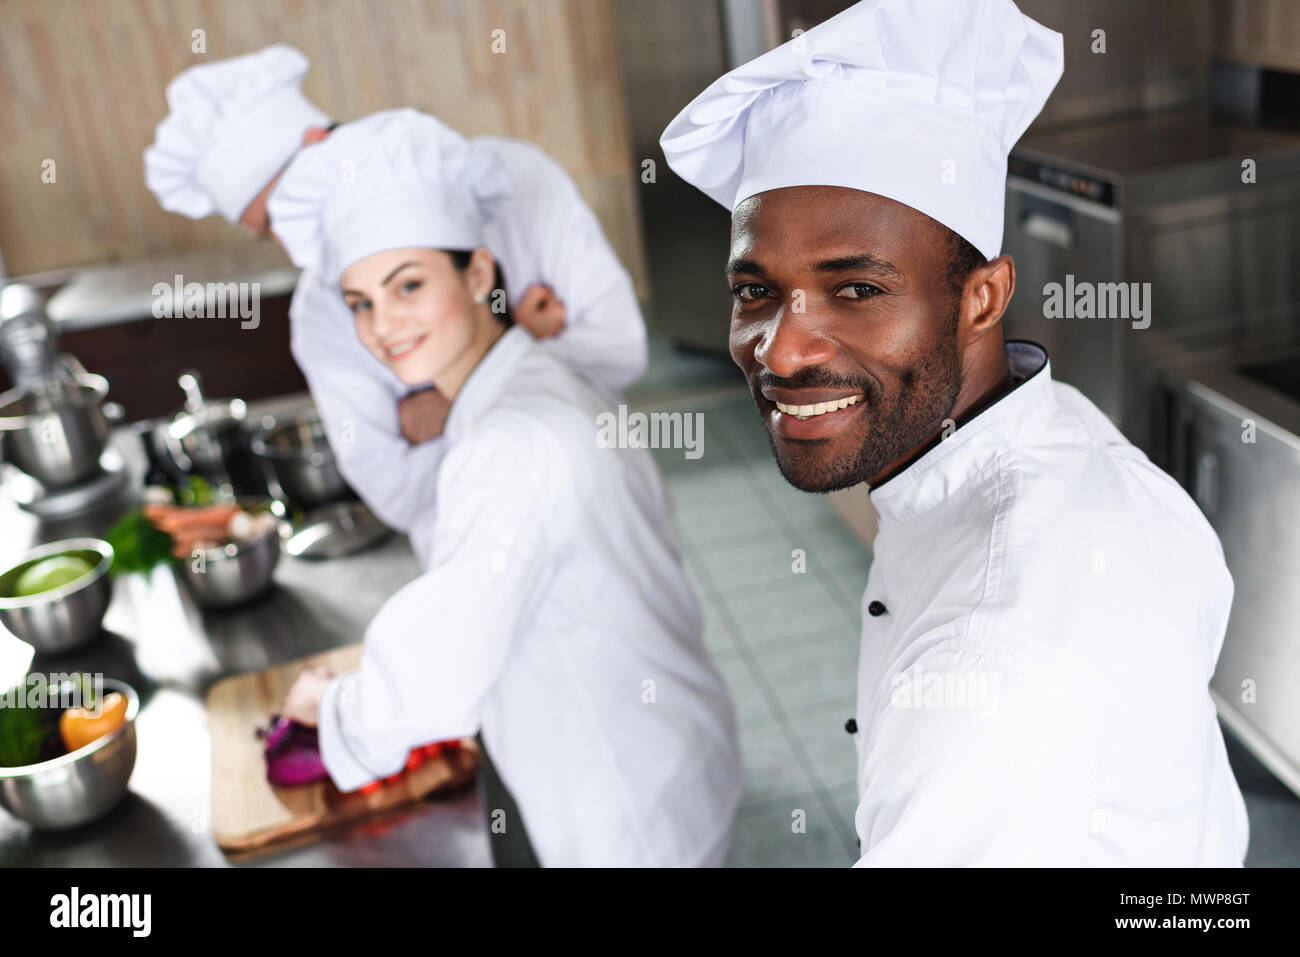 Multiracial chefs team smiling while cooking by kitchen counter Stock Photo